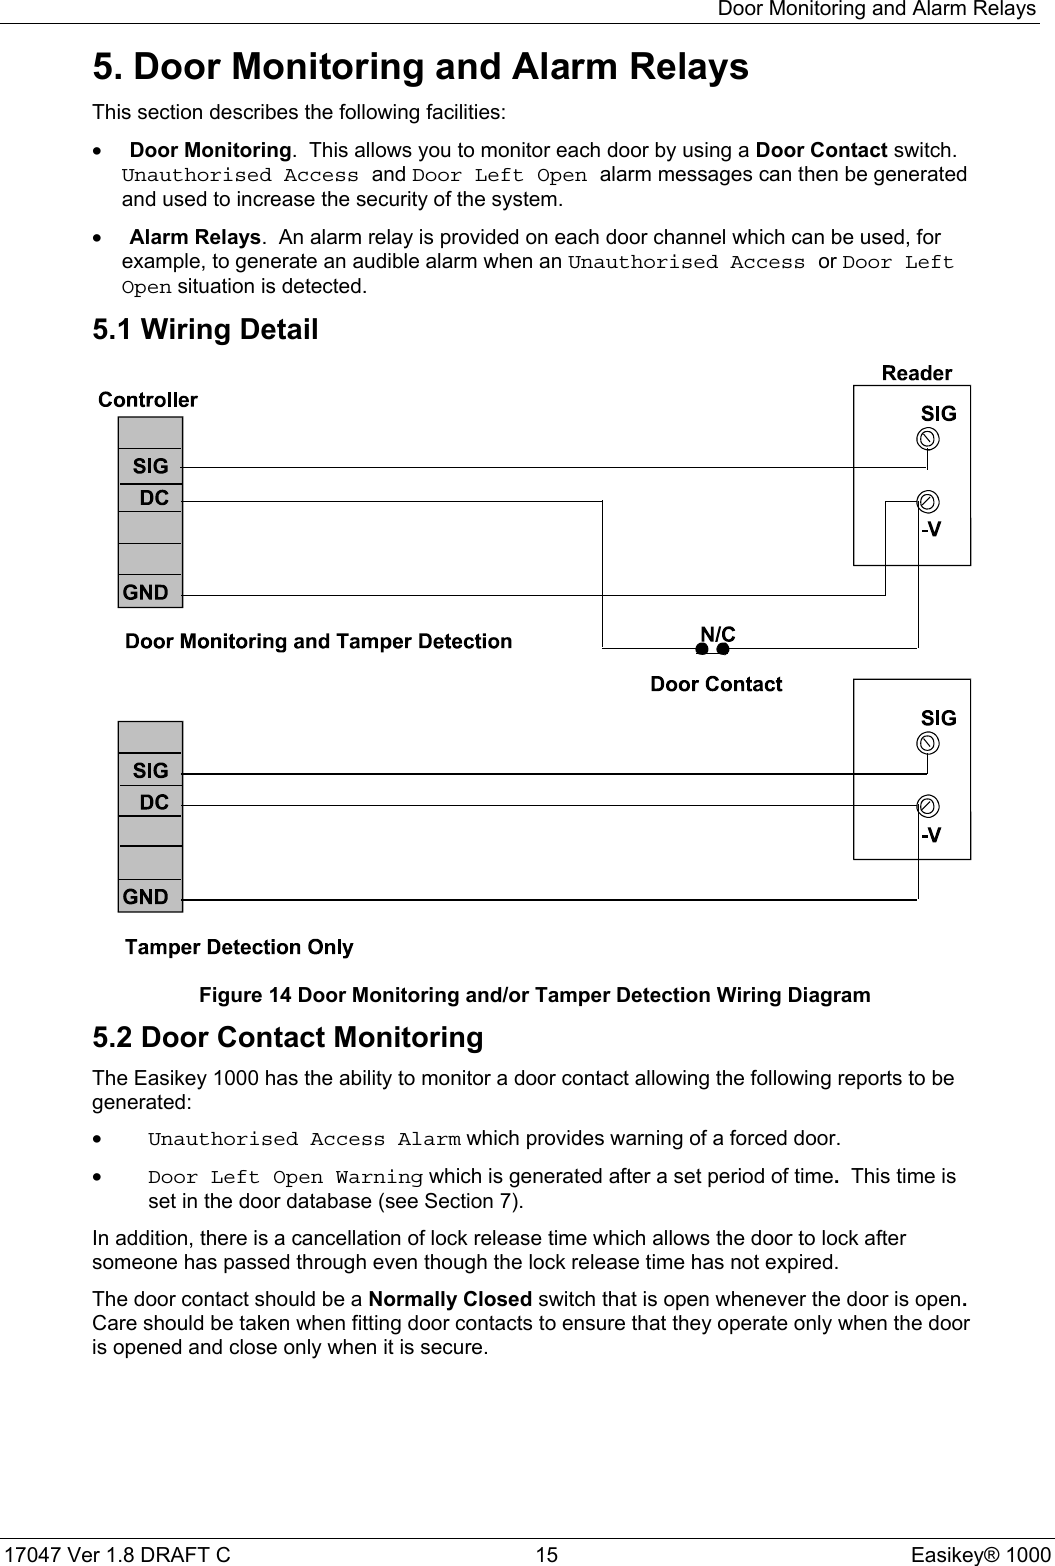 Door Monitoring and Alarm Relays17047 Ver 1.8 DRAFT C  15 Easikey® 10005. Door Monitoring and Alarm RelaysThis section describes the following facilities:• Door Monitoring.  This allows you to monitor each door by using a Door Contact switch.Unauthorised Access and Door Left Open alarm messages can then be generatedand used to increase the security of the system.• Alarm Relays.  An alarm relay is provided on each door channel which can be used, forexample, to generate an audible alarm when an Unauthorised Access or Door LeftOpen situation is detected.5.1 Wiring DetailFigure 14 Door Monitoring and/or Tamper Detection Wiring Diagram5.2 Door Contact MonitoringThe Easikey 1000 has the ability to monitor a door contact allowing the following reports to begenerated:•Unauthorised Access Alarm which provides warning of a forced door.•Door Left Open Warning which is generated after a set period of time.  This time isset in the door database (see Section 7).In addition, there is a cancellation of lock release time which allows the door to lock aftersomeone has passed through even though the lock release time has not expired.The door contact should be a Normally Closed switch that is open whenever the door is open.Care should be taken when fitting door contacts to ensure that they operate only when the dooris opened and close only when it is secure.